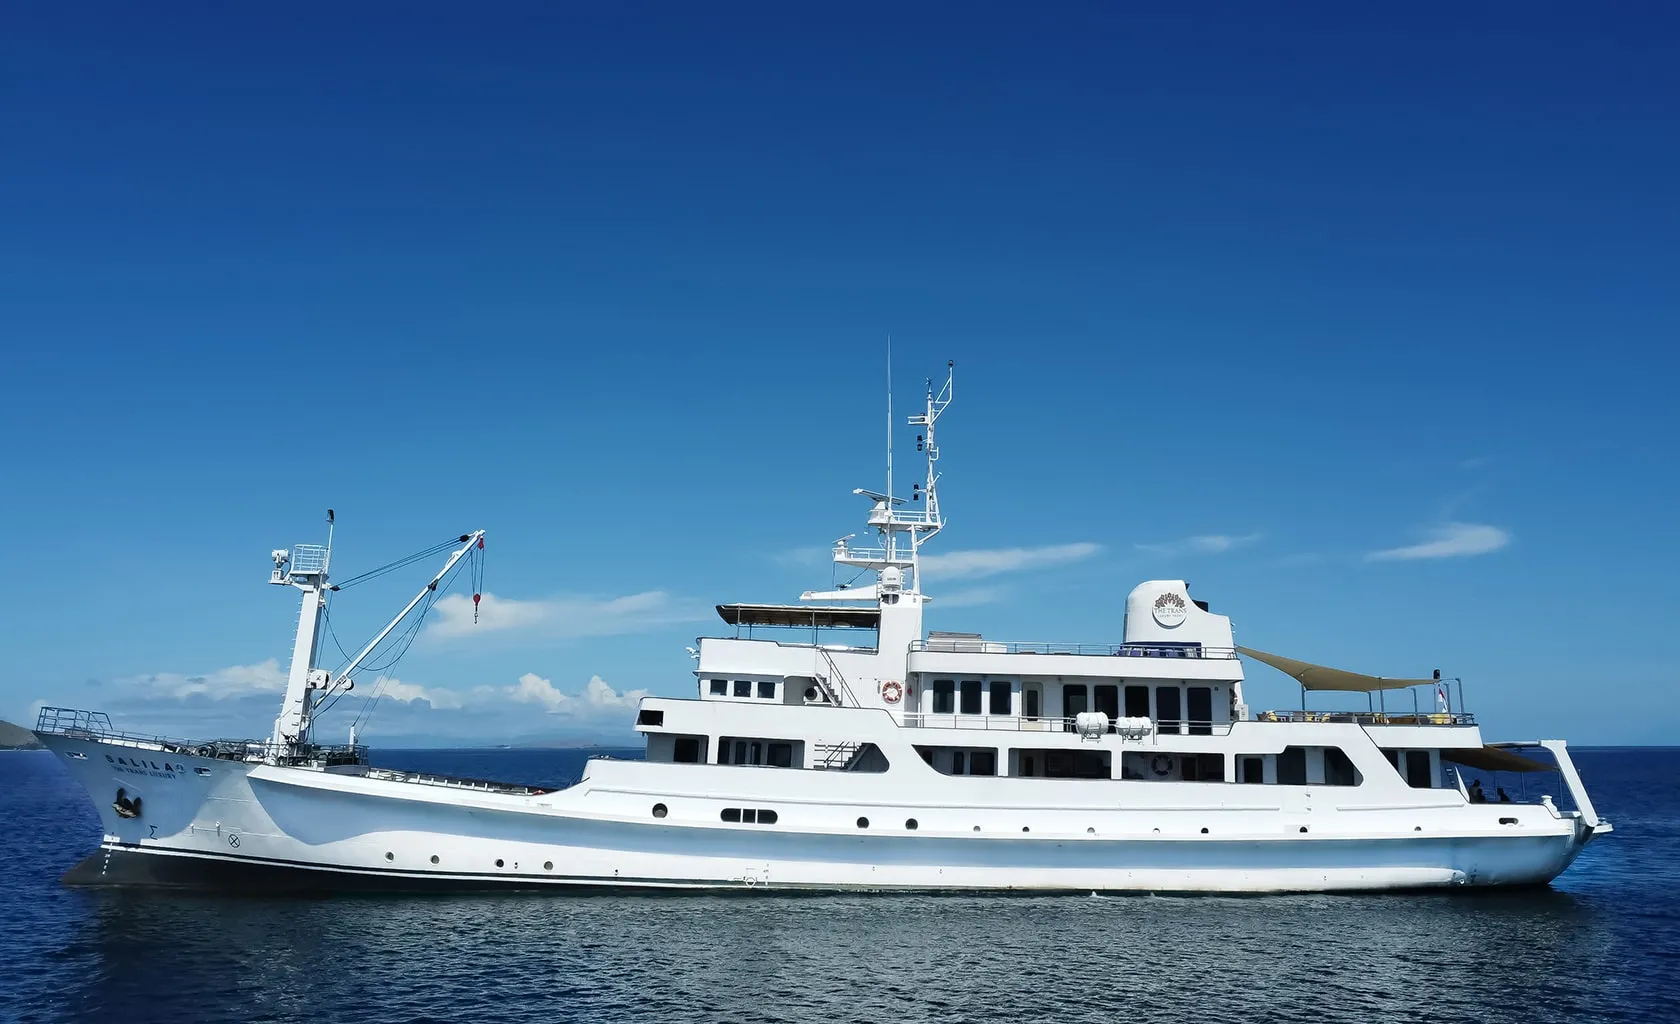 THE TRANS LUXURY YACHT Anchored